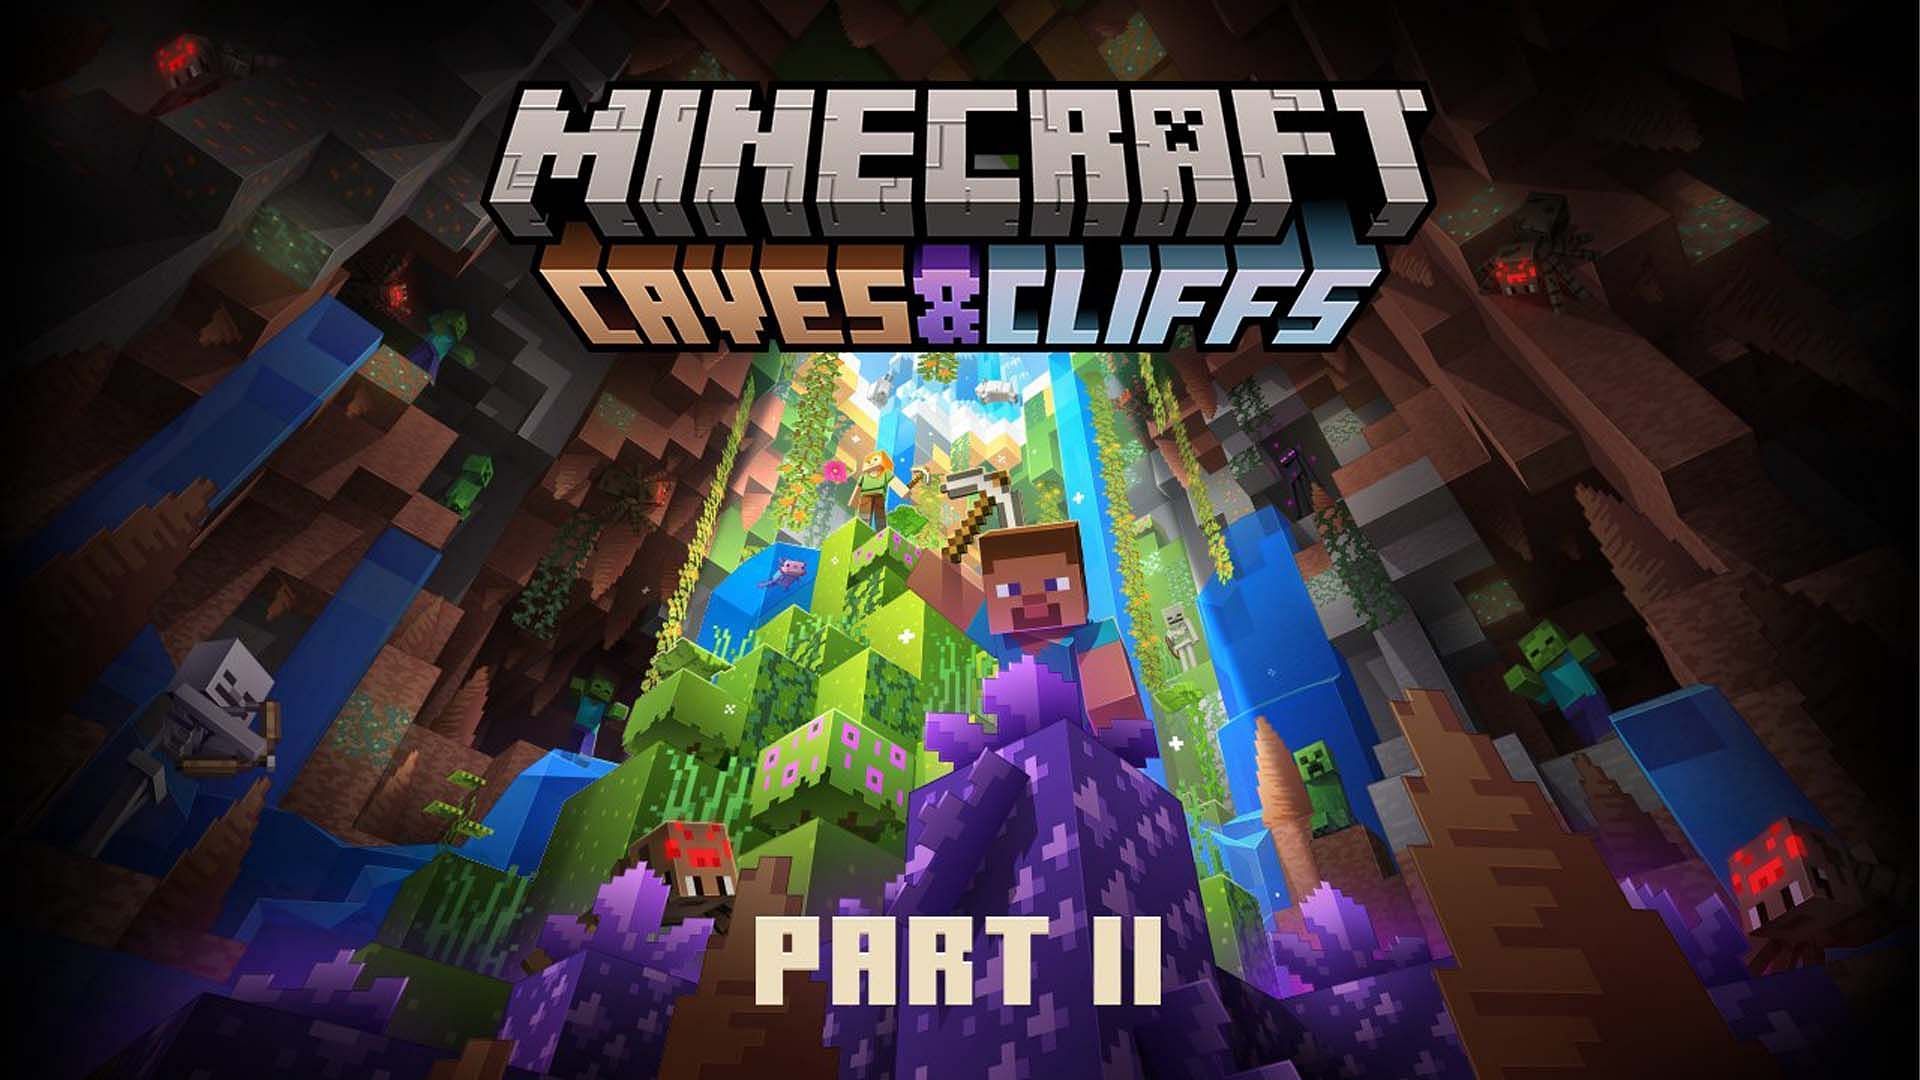 How to download and update Minecraft 1.18.1 version on Pocket Edition